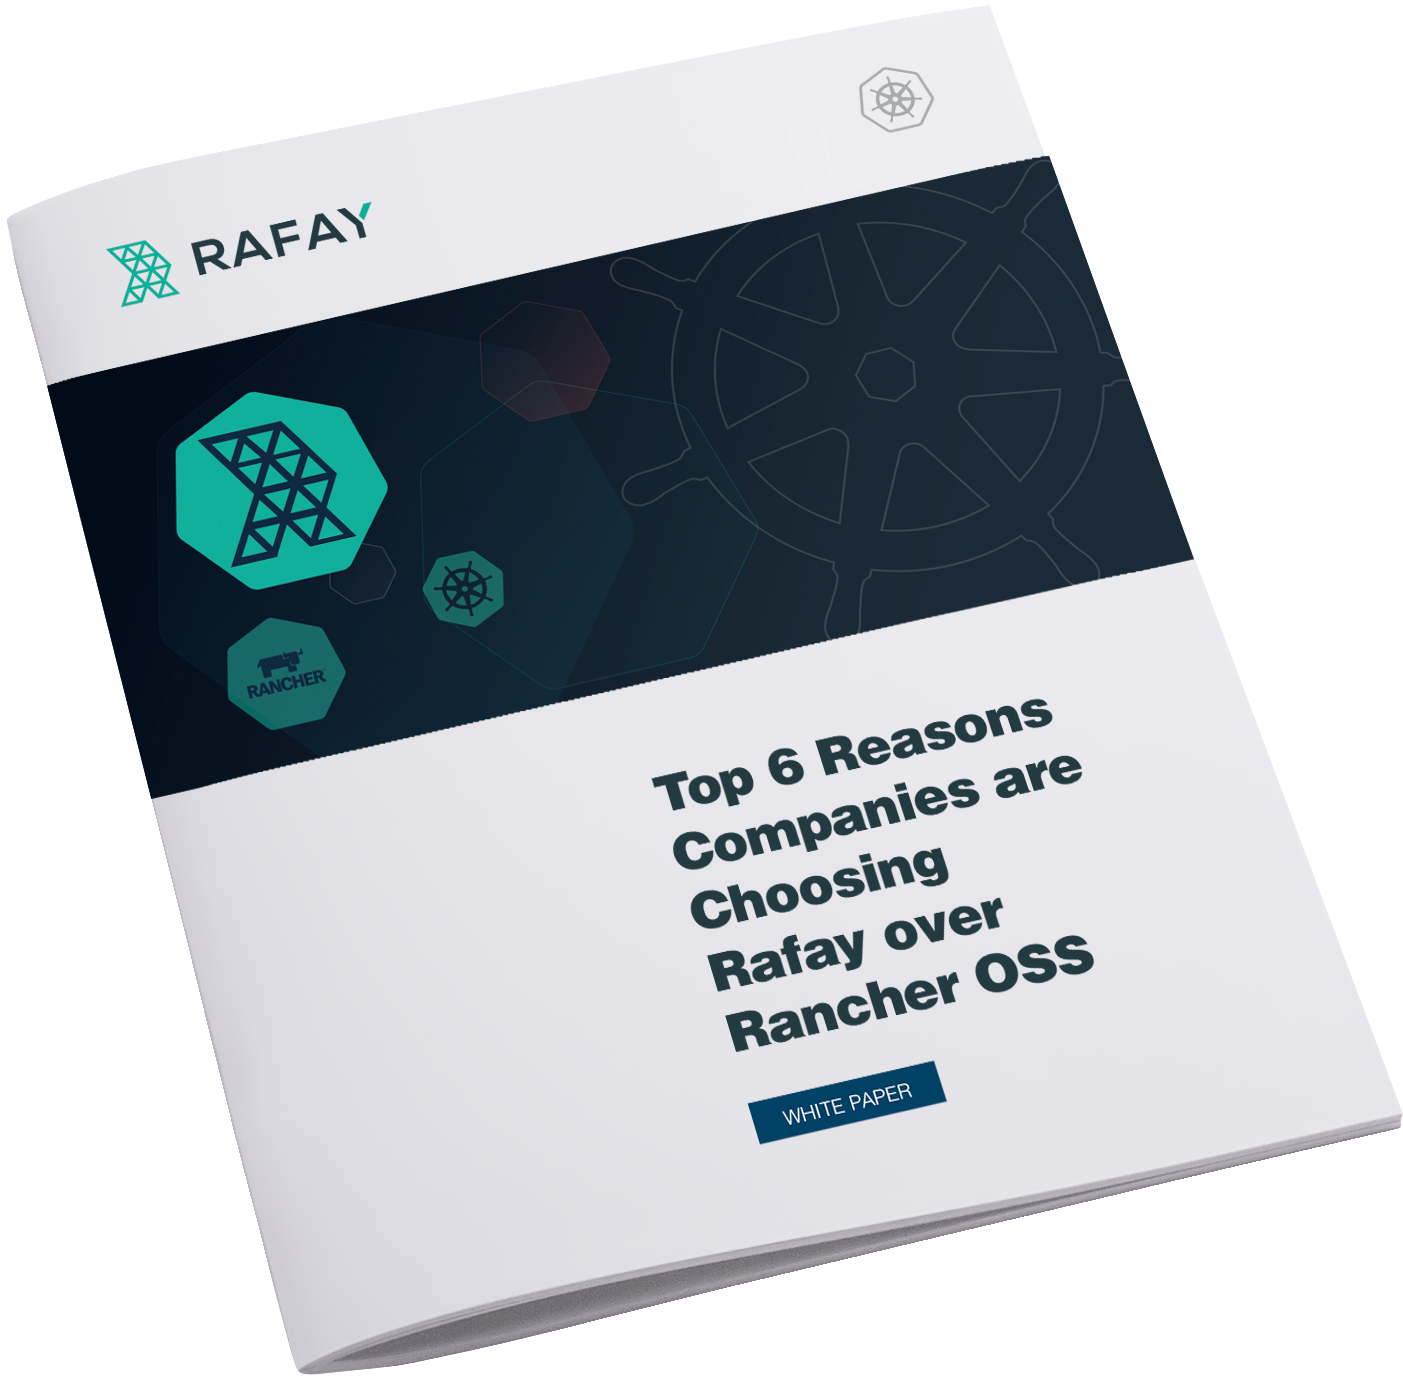 image for Top 6 Reasons Companies are Choosing Rafay over Rancher OSS